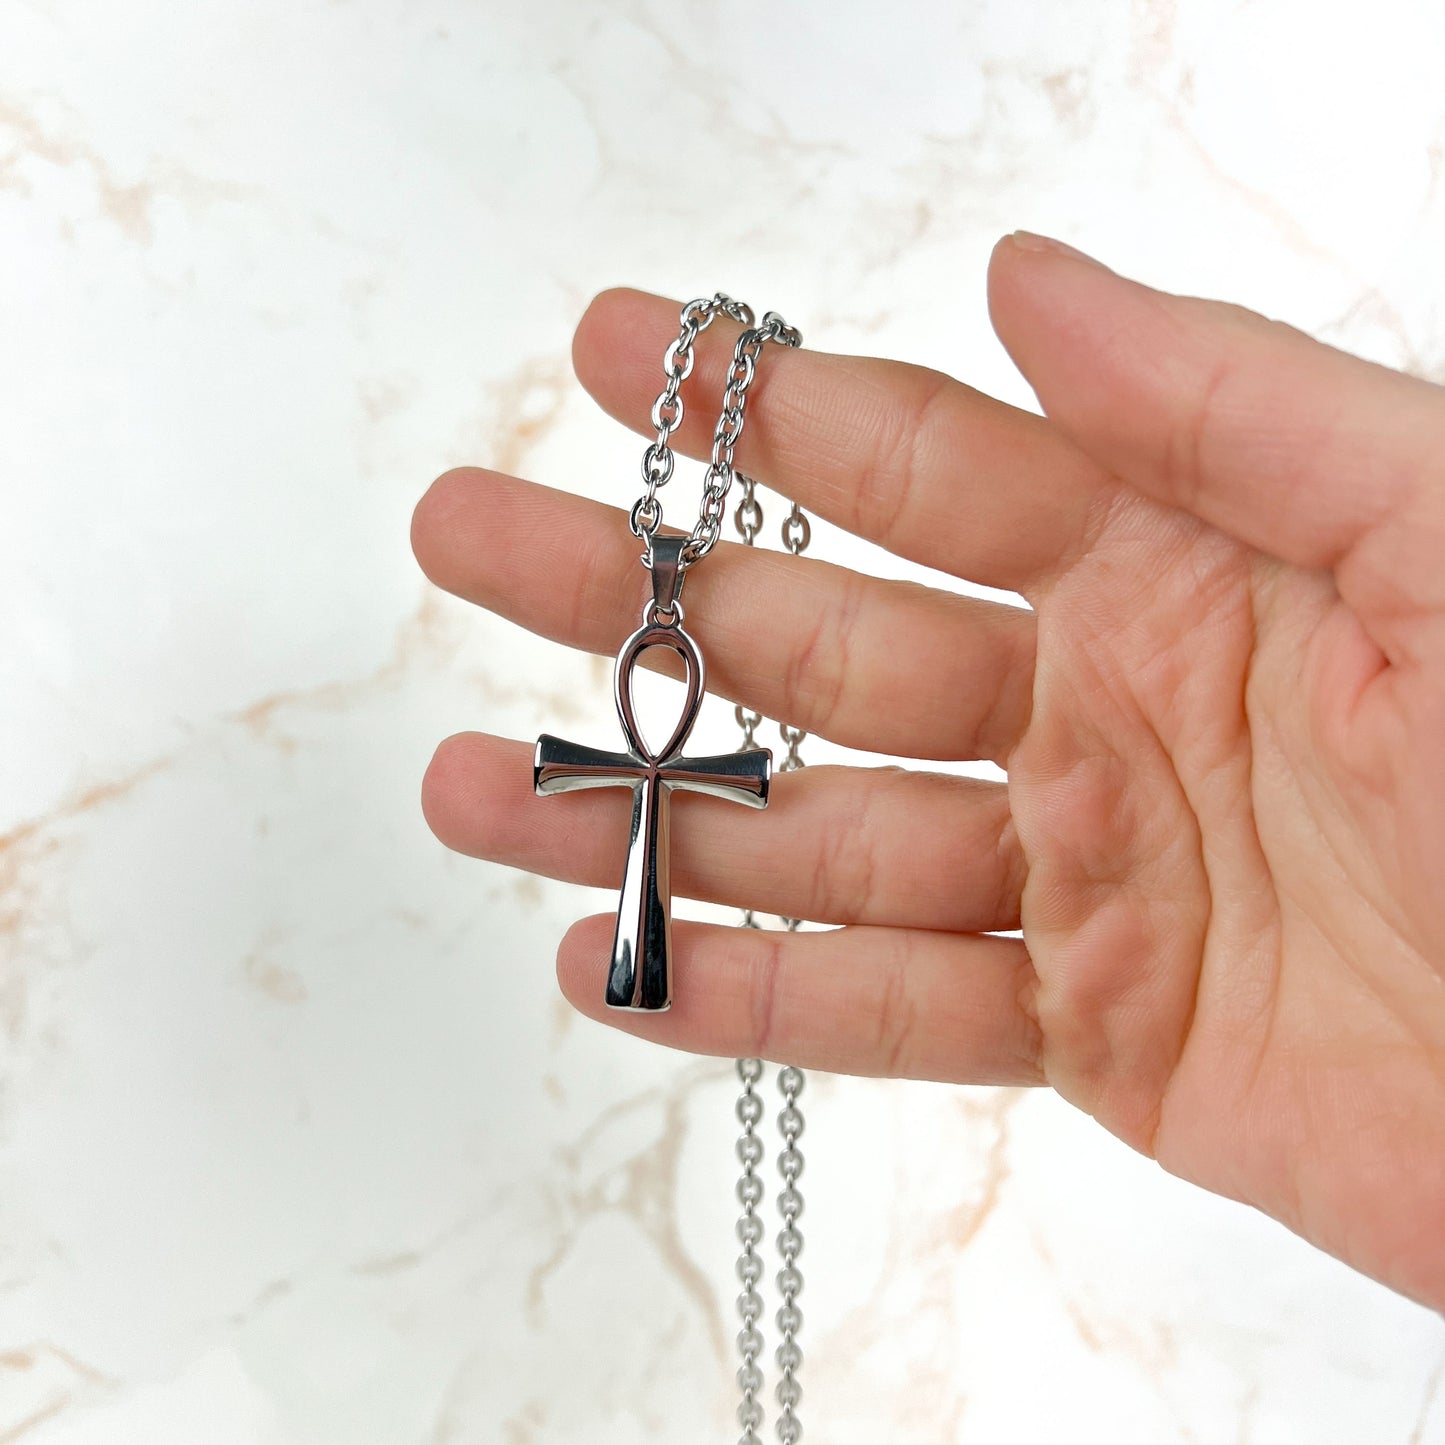 Ankh, key of the Nil necklace, stainless steel Baguette Magick